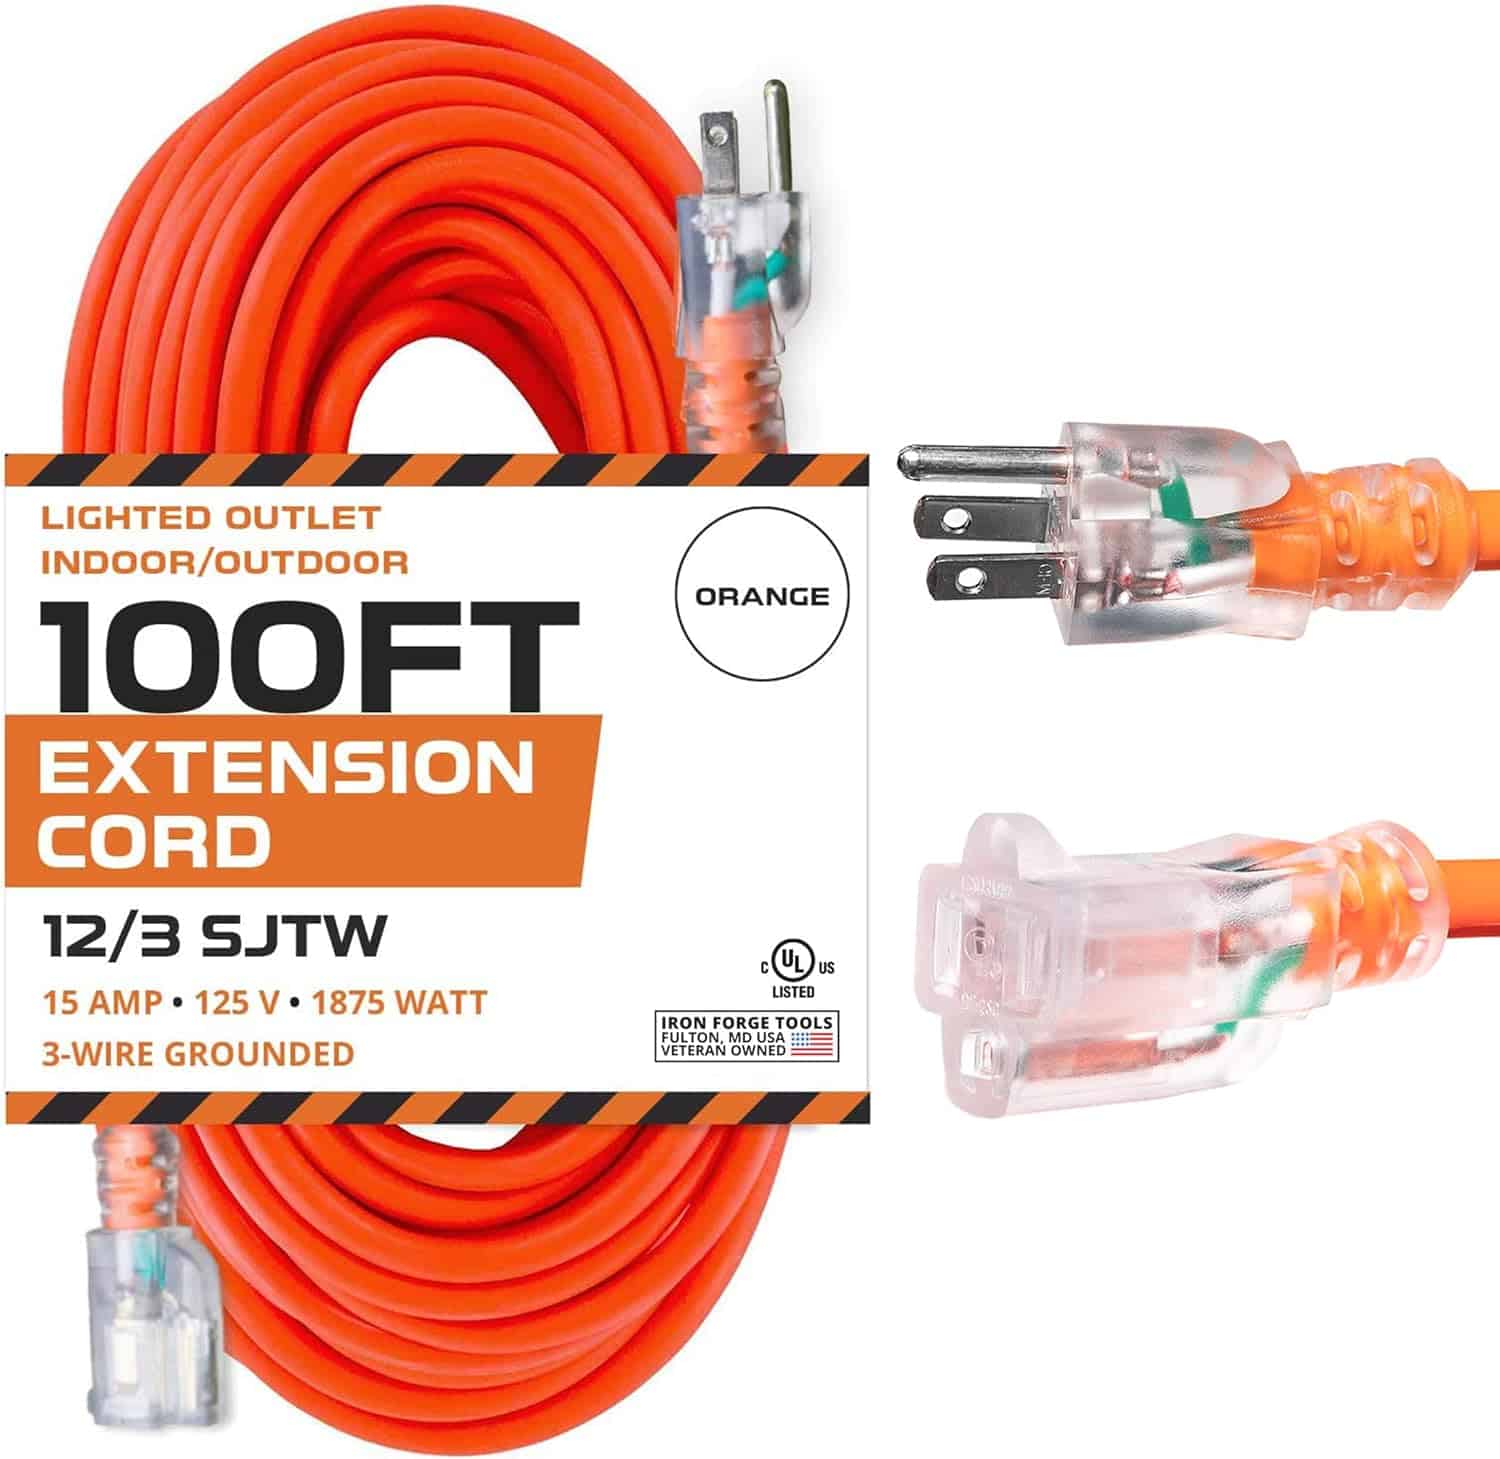 Iron-Forge-12-Gauge-Outdoor-Extension-Cord-100-Ft-with-Lighted-End12-3-Heavy-Duty-Extension-Cable-with-3-Prong-Grounded-Plug-SJTW-Weatherproof-Long